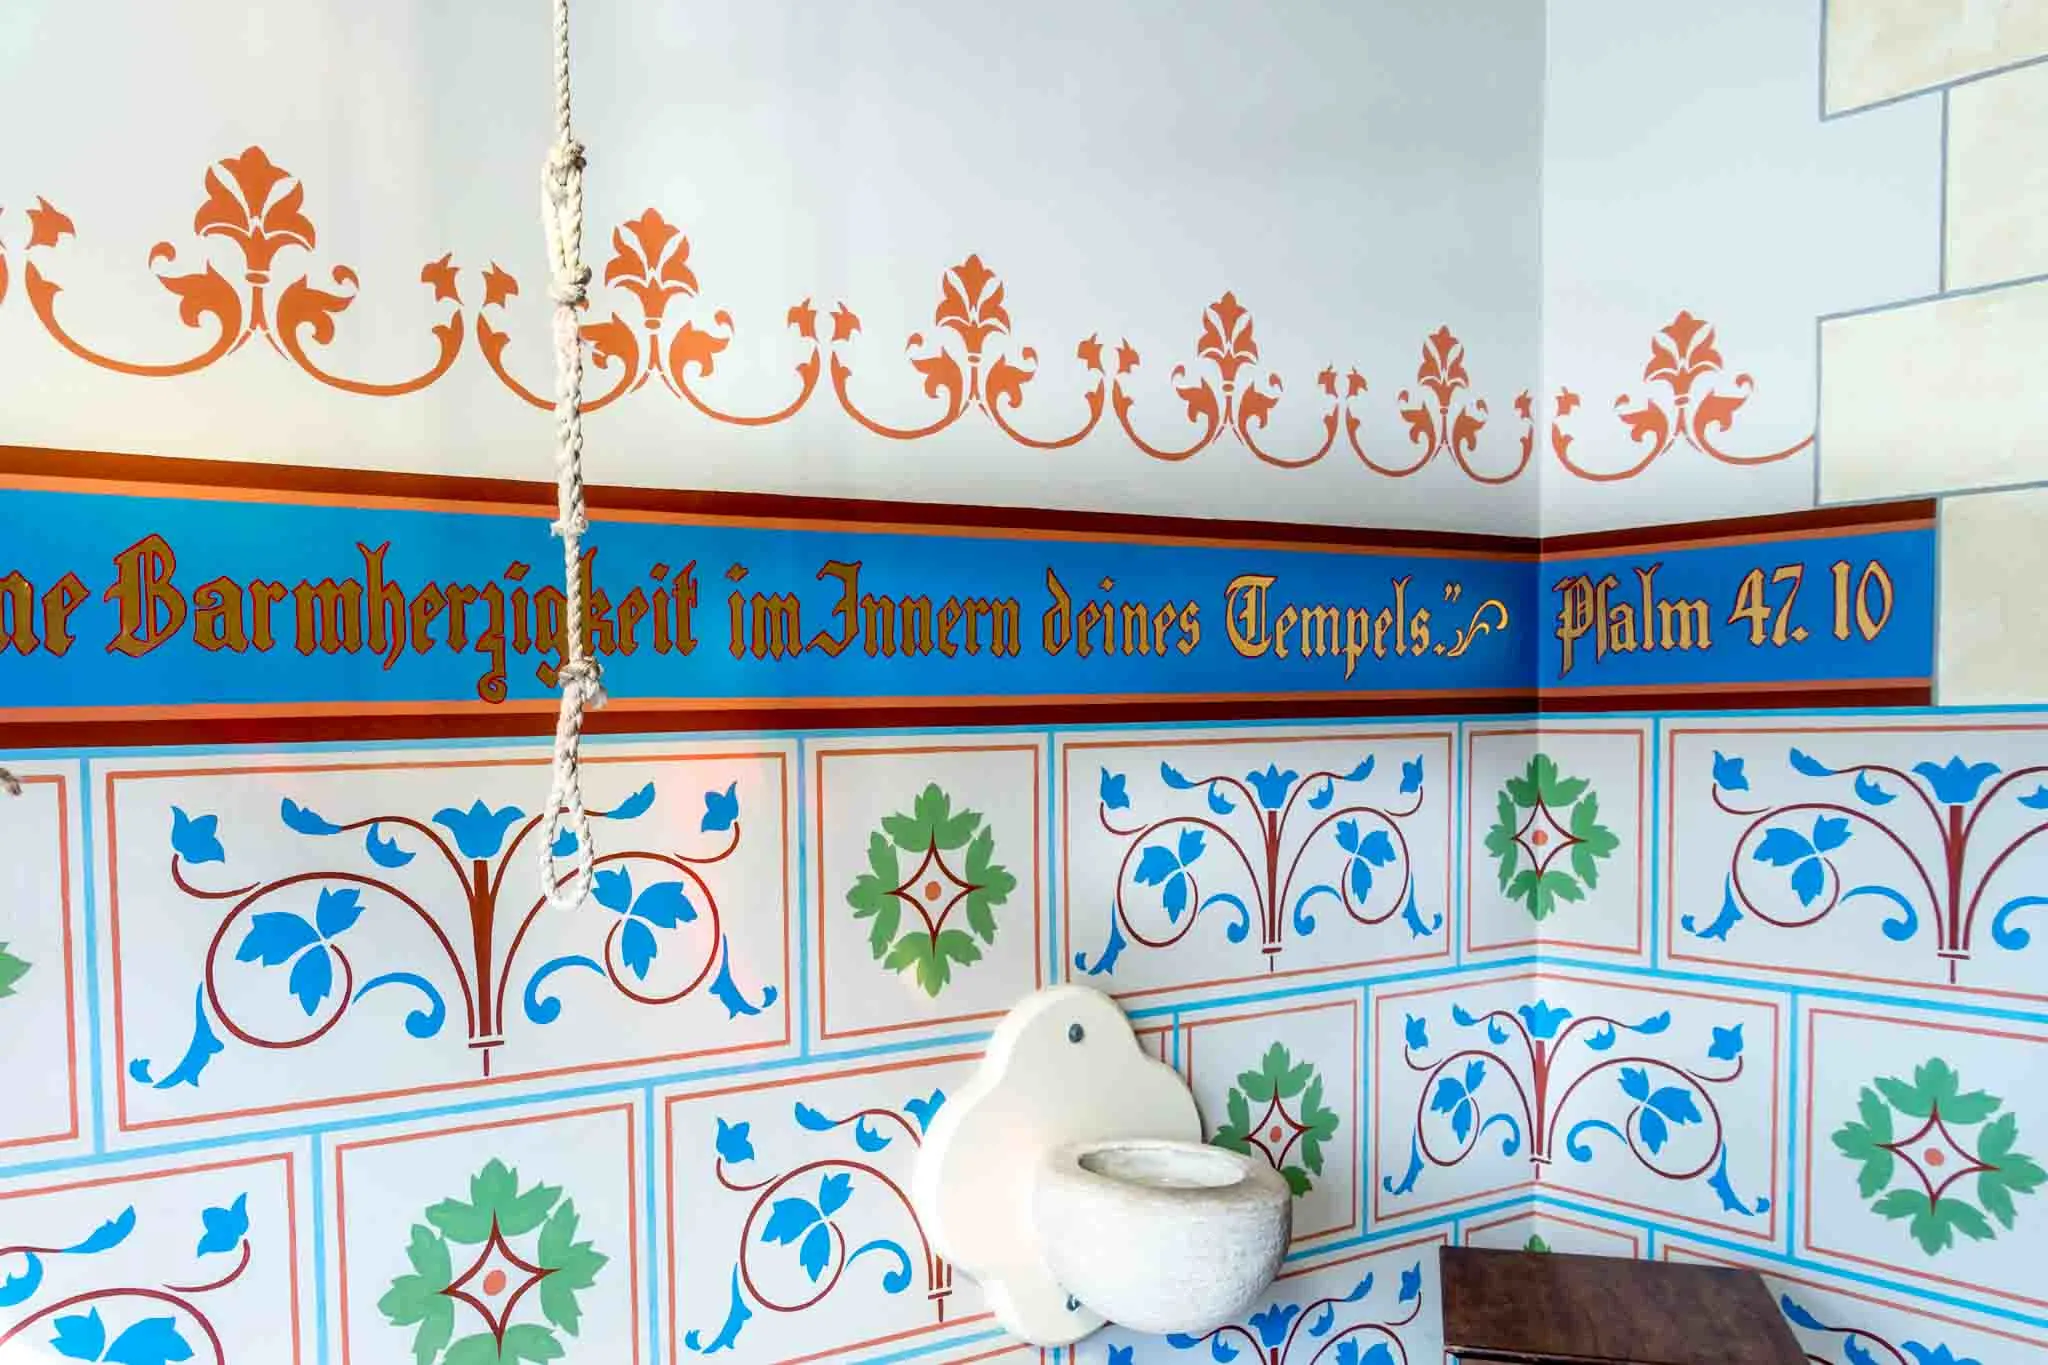 German Bible verse painted on a wall with holy water font